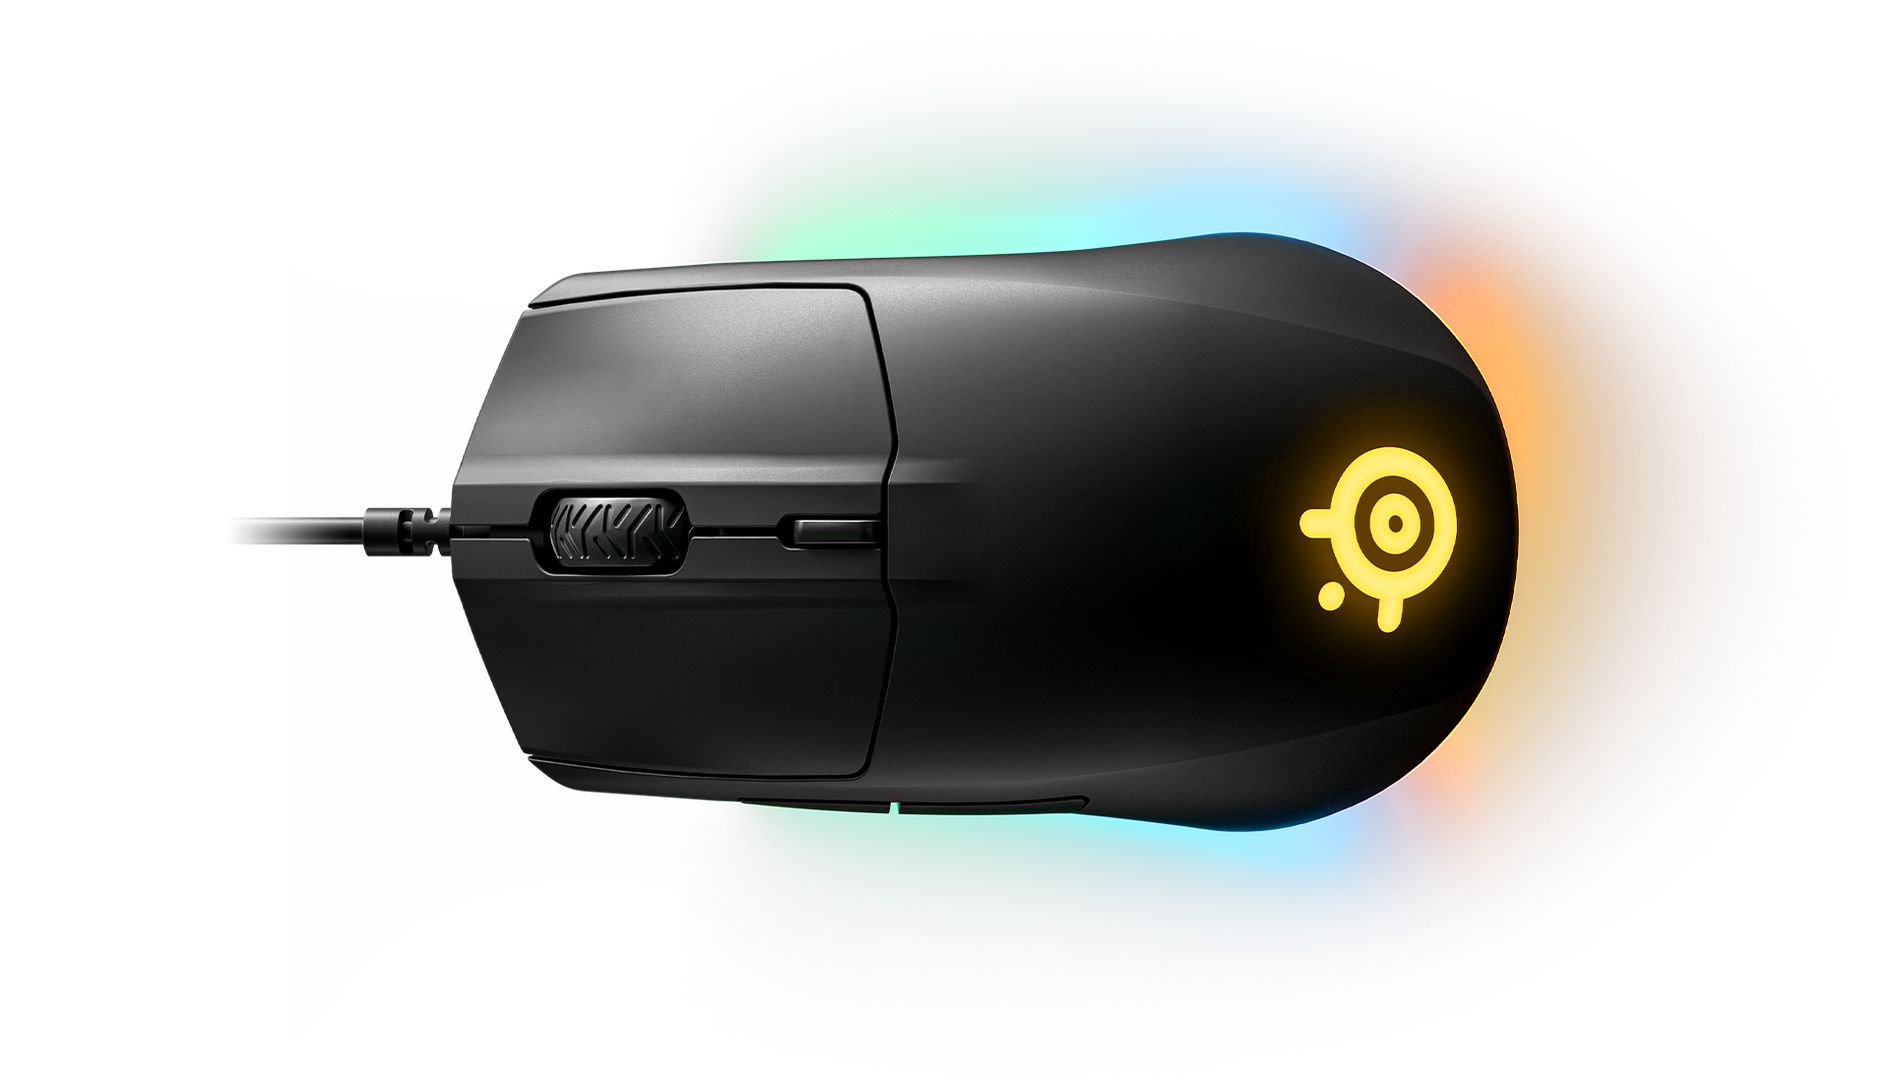 RIVAL 3 SteelSeries Mouse